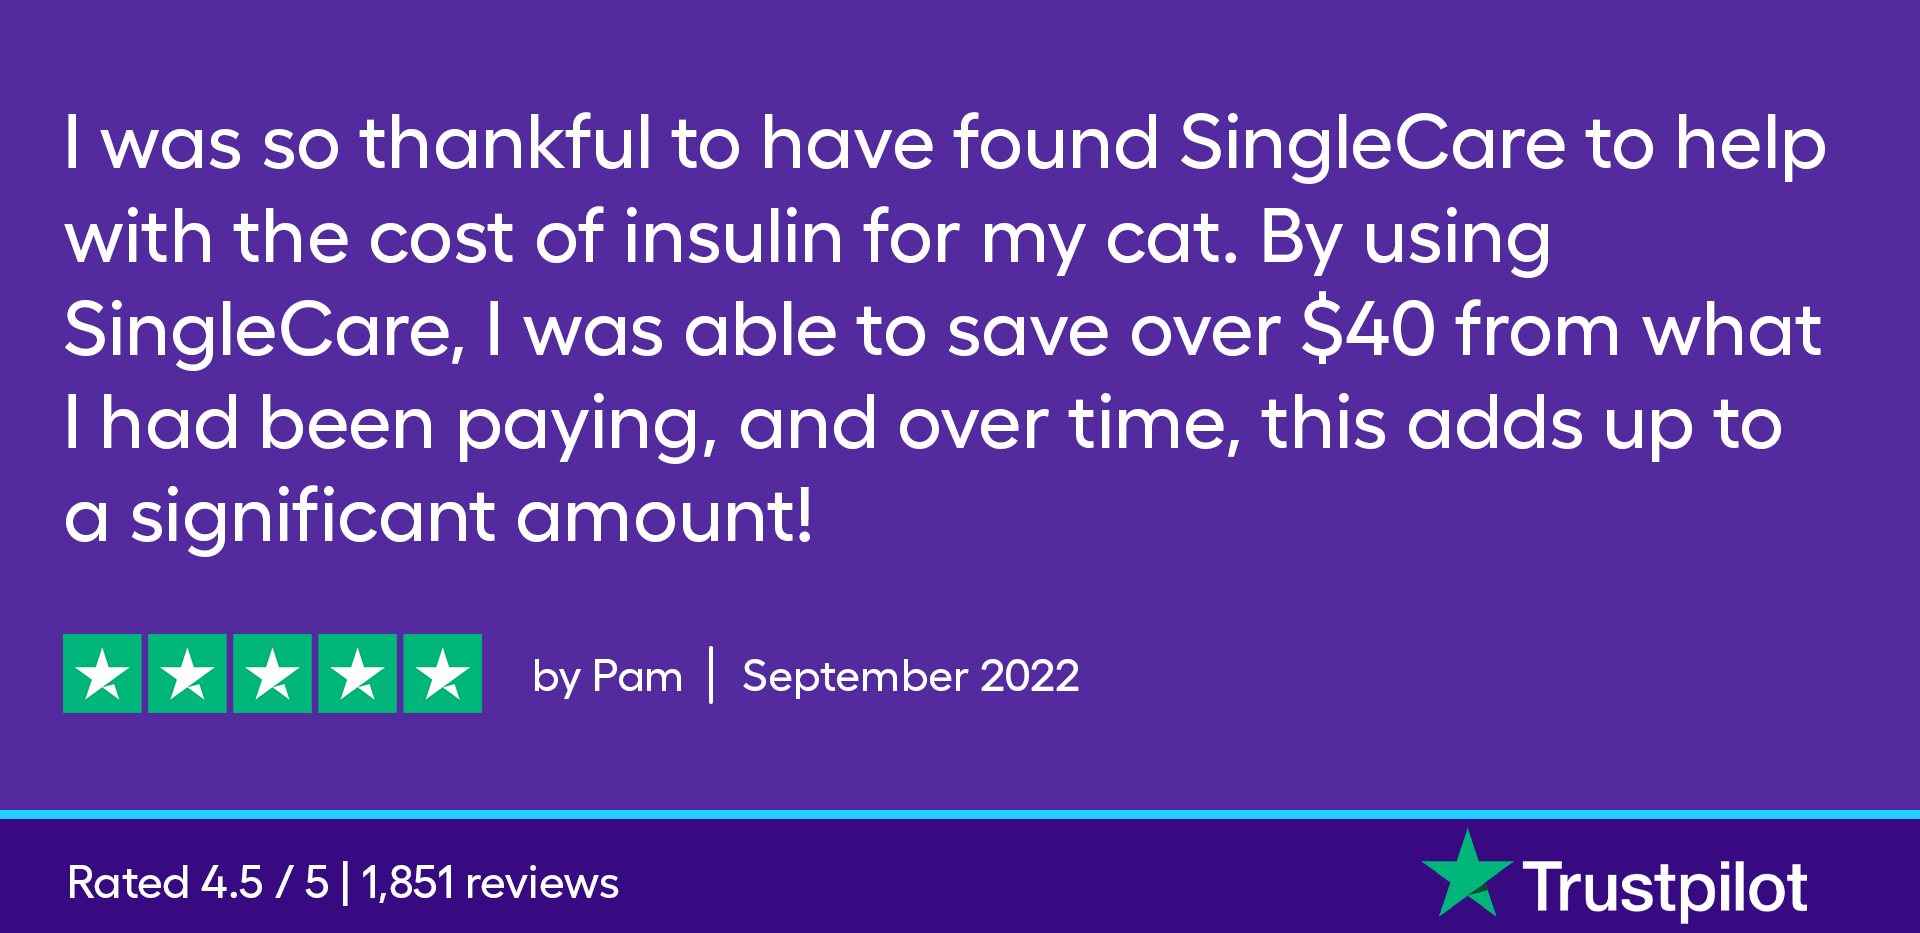 I was so thankful to have found SingleCare to help with the cost of insulin for my cat. By using SingleCare, I was able to save over $40 from what I had been paying, and over time, this adds up to a significant amount! 